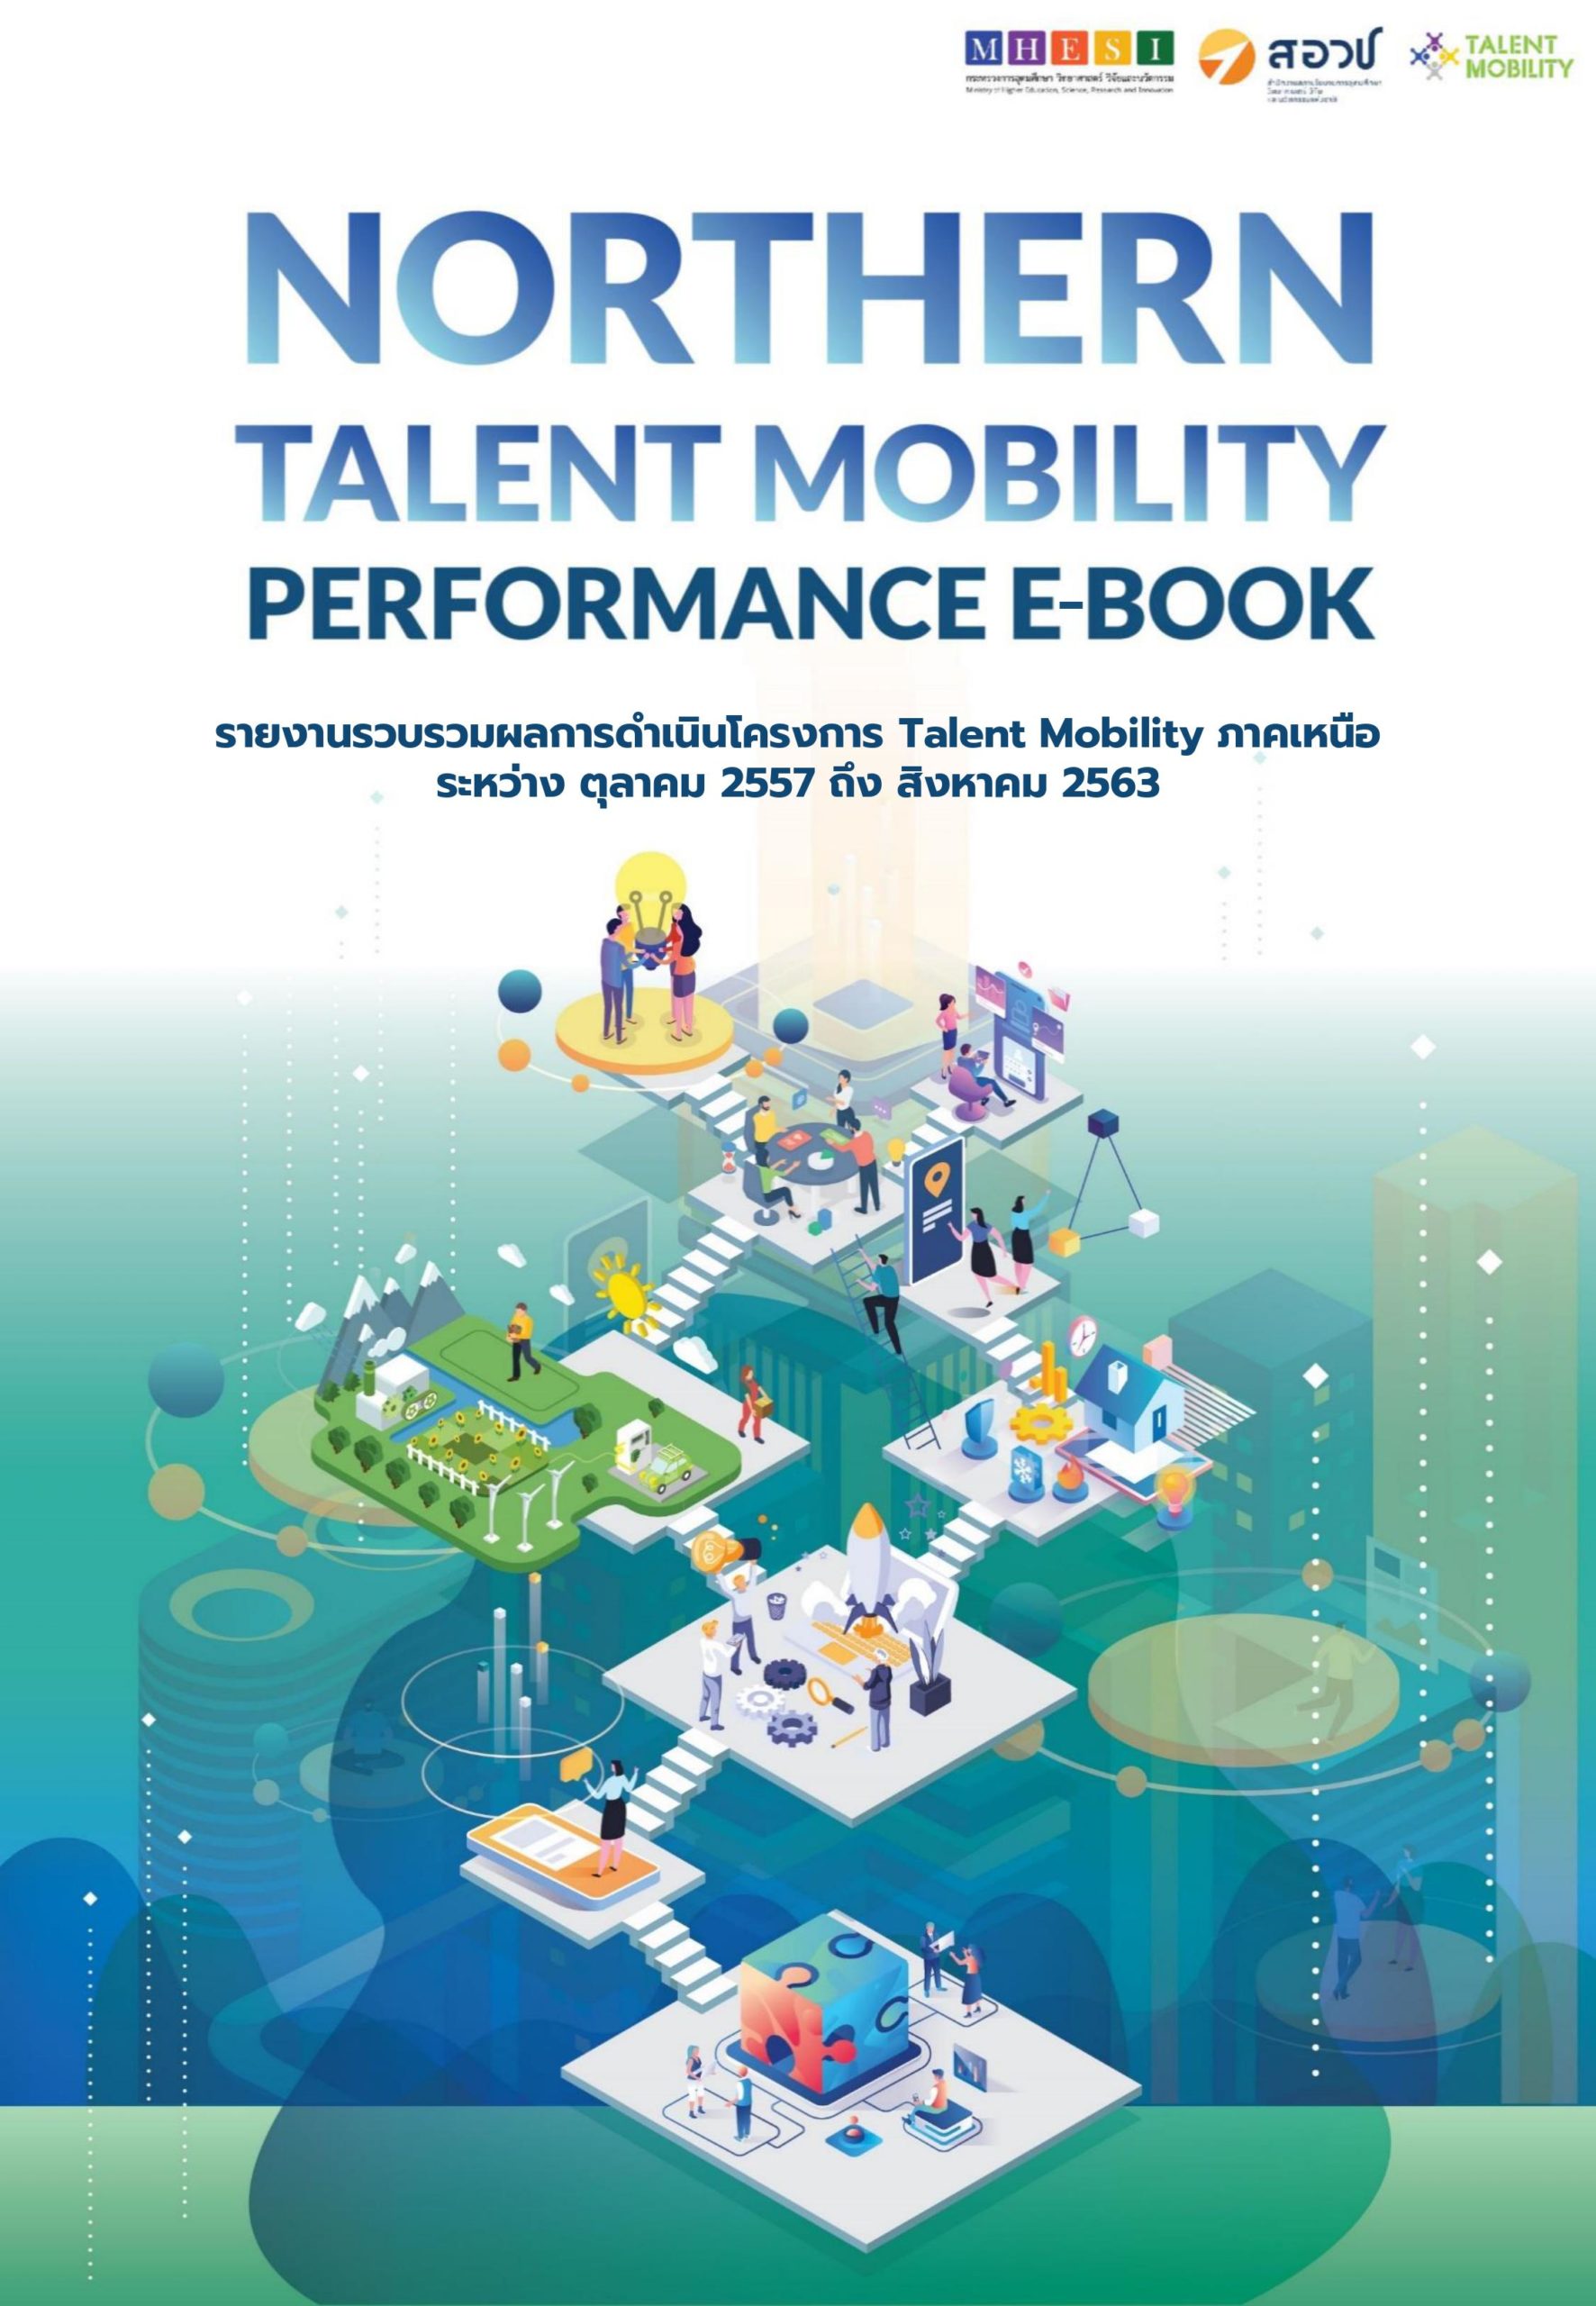 Northern Talent Mobility Performance